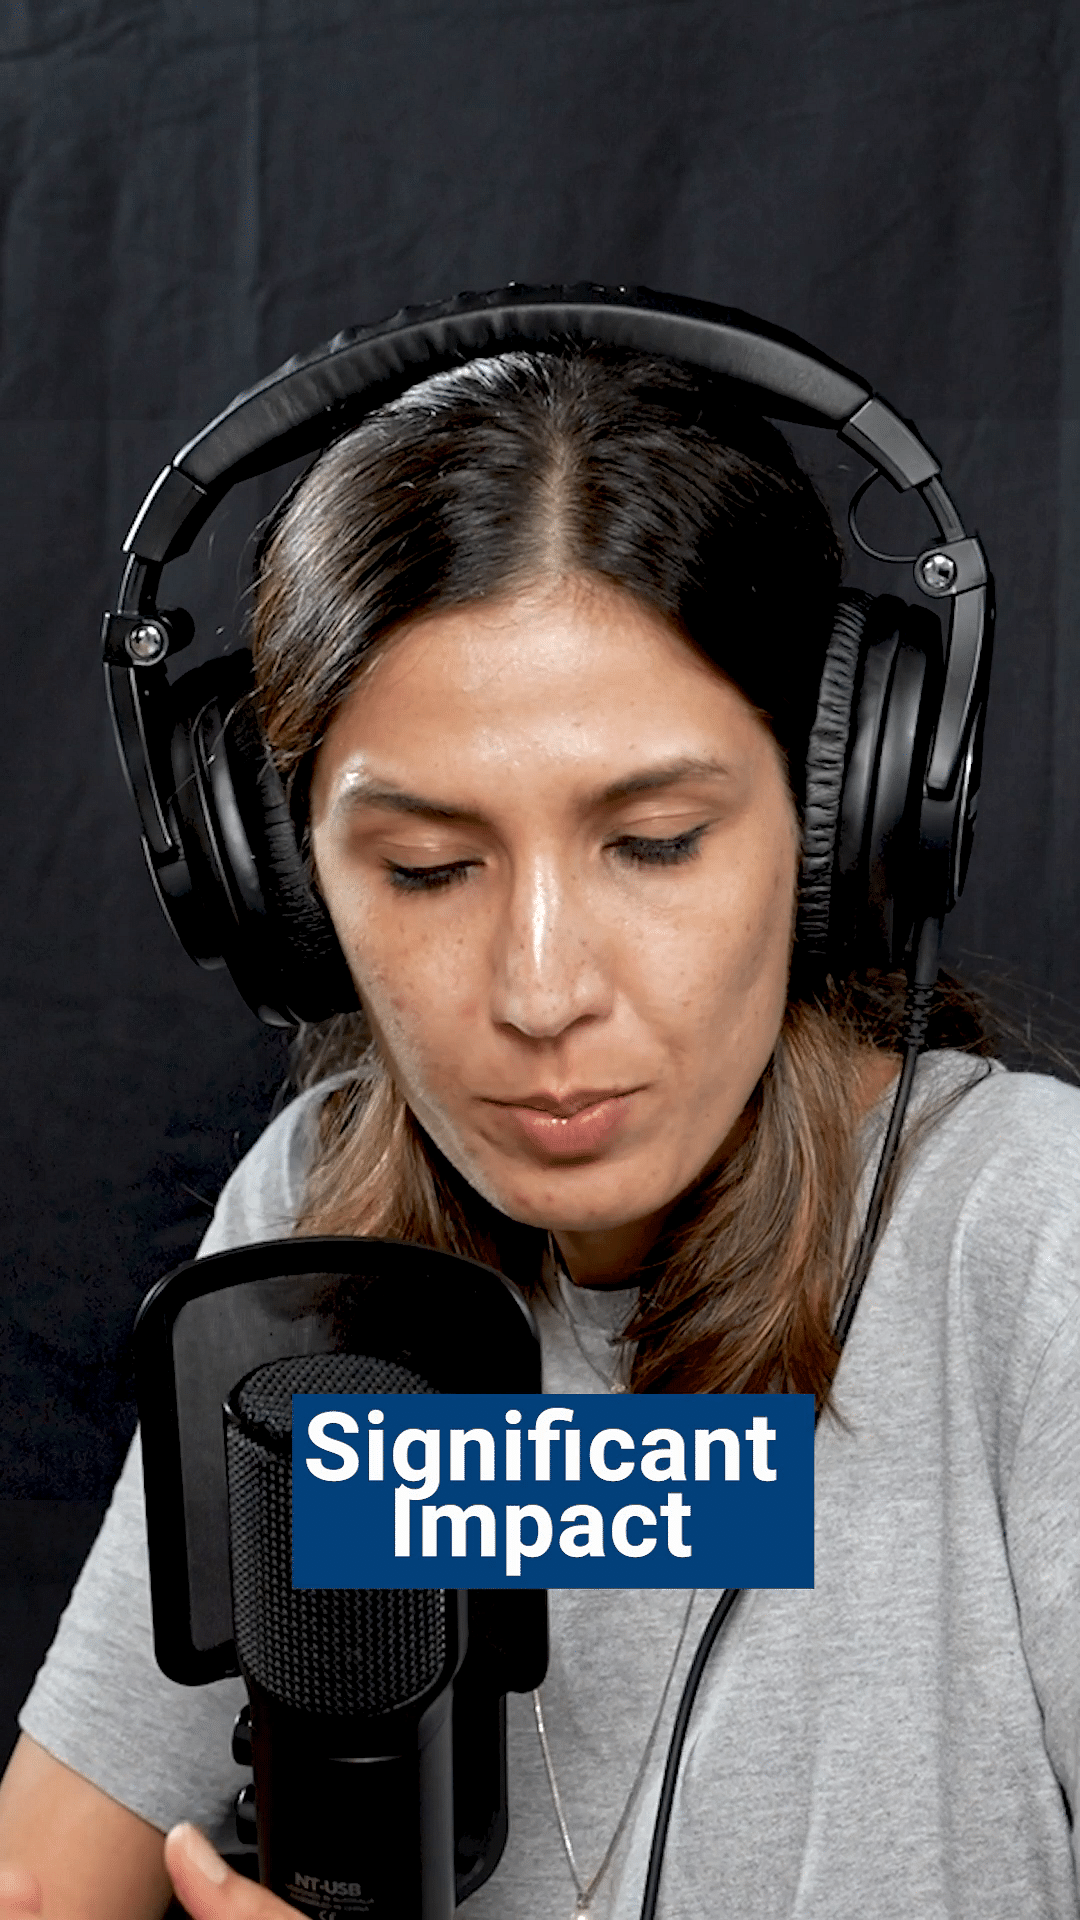 Chin,Hearing,Organ,Output device,Flash photography,Peripheral,Ear,Gadget,Audio equipment,Cool